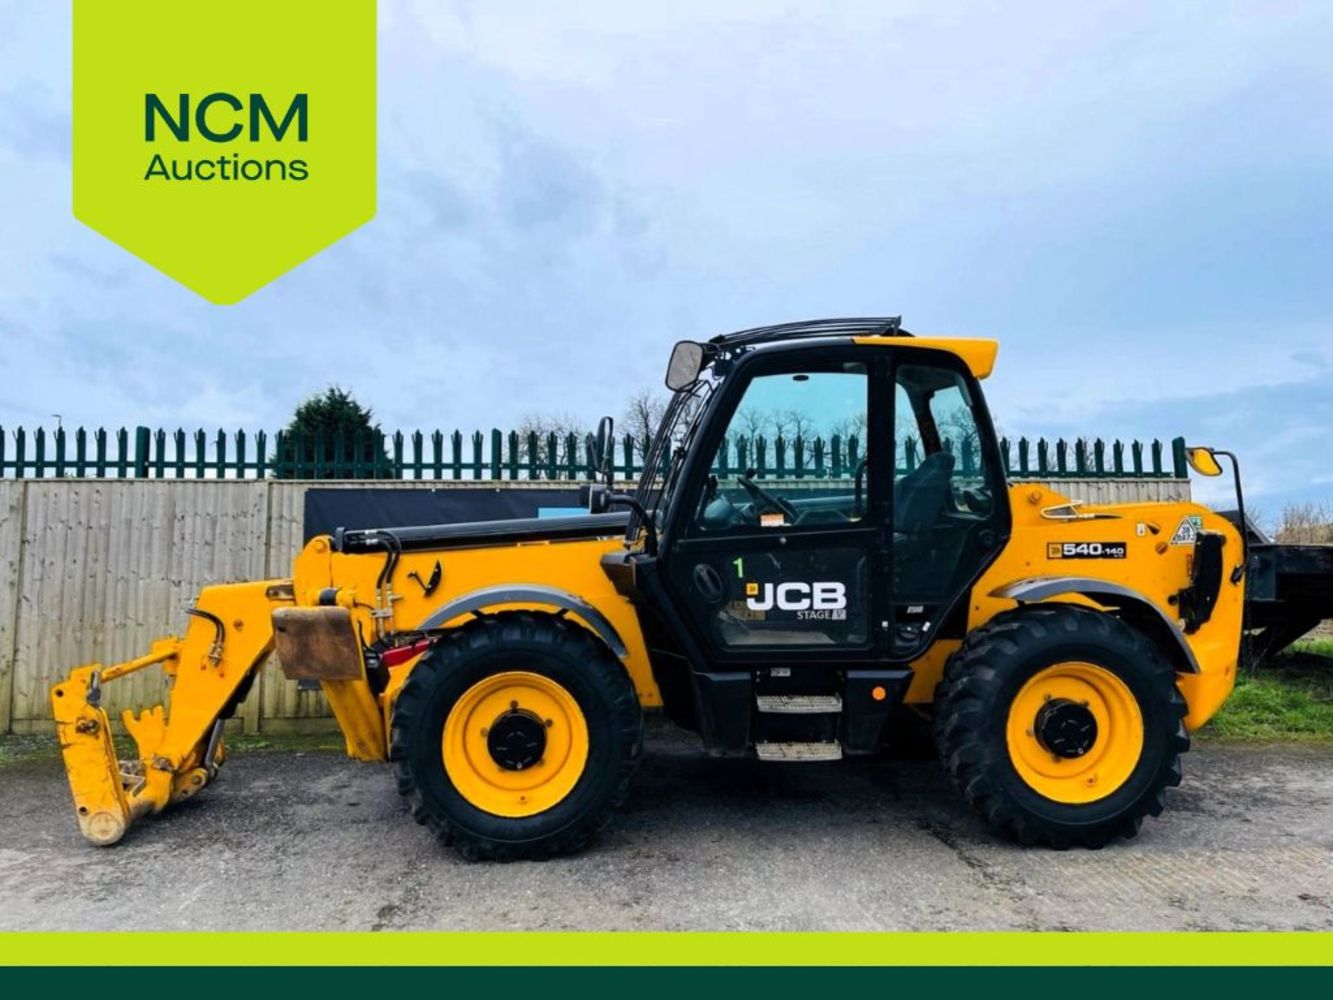 Plant, Machinery & Commercial Vehicles - Featuring 40ft Shipping Containers, Forklifts, Telehandlers, Excavators & Land Rover Defenders.